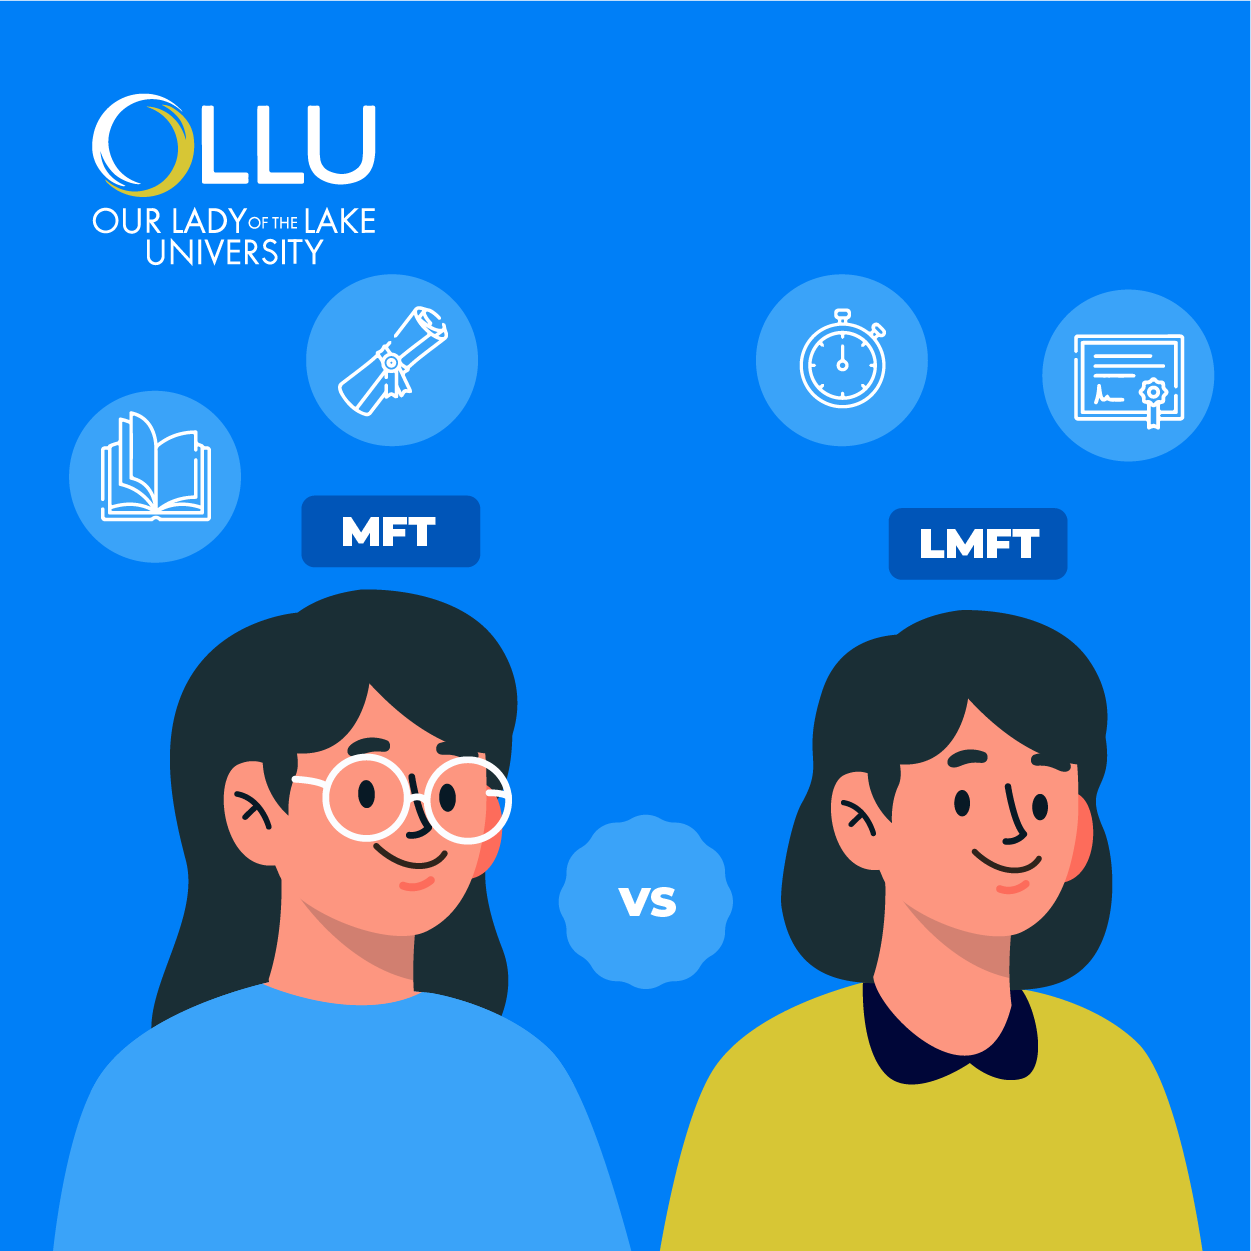 MFT vs. LMFT - What's the Difference?